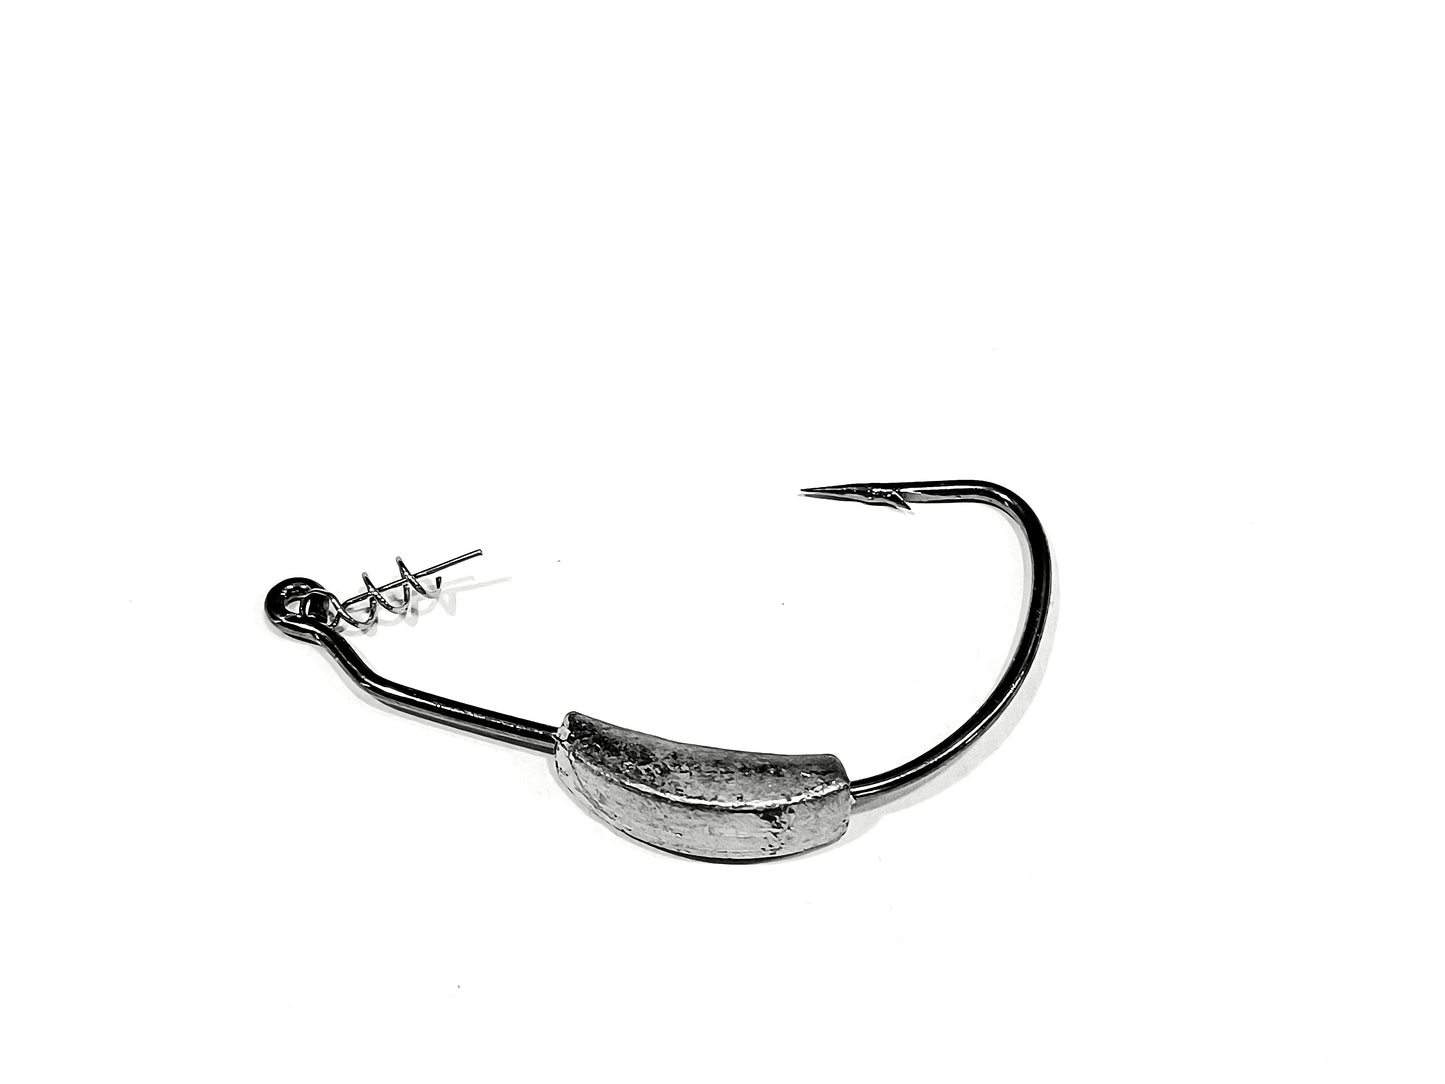 WEIGHTED 1/4oz extra wide gap weedless heavy gauge hooks with spring lock bait keeper (Bass Fishing -Swimbaits-Creature Baits-Grubs)